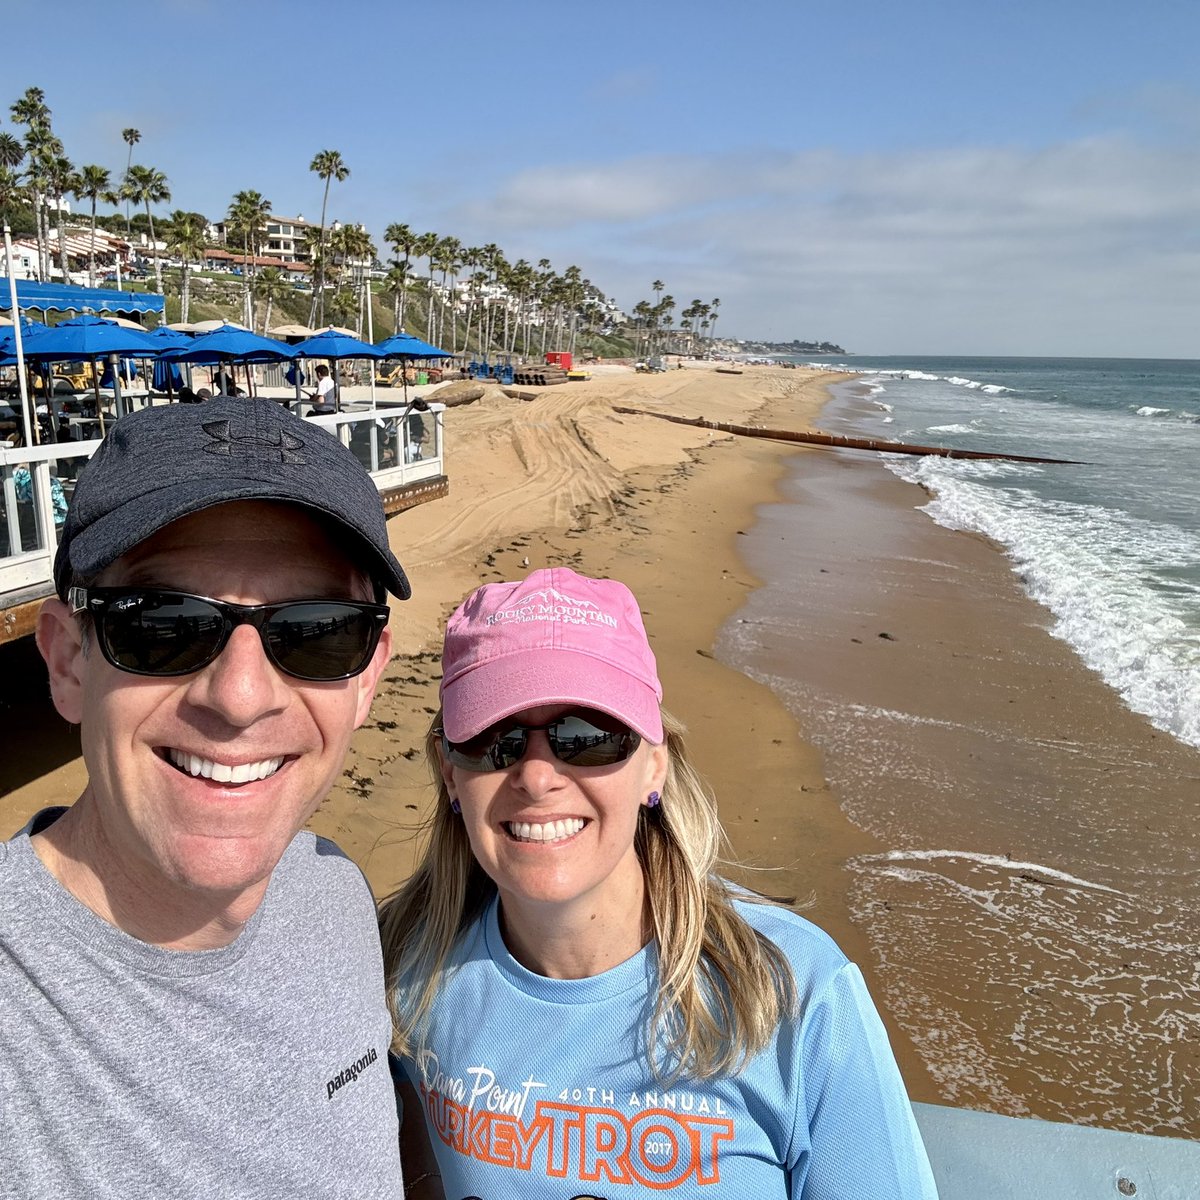 Beautiful afternoon for a walk on the San Clemente Pier. Amazing to see 100,000 cubic yards of new sand being added to the beach! Proud to have delivered $9.3M in federal funds for this long overdue project. 🏖️ 🇺🇸